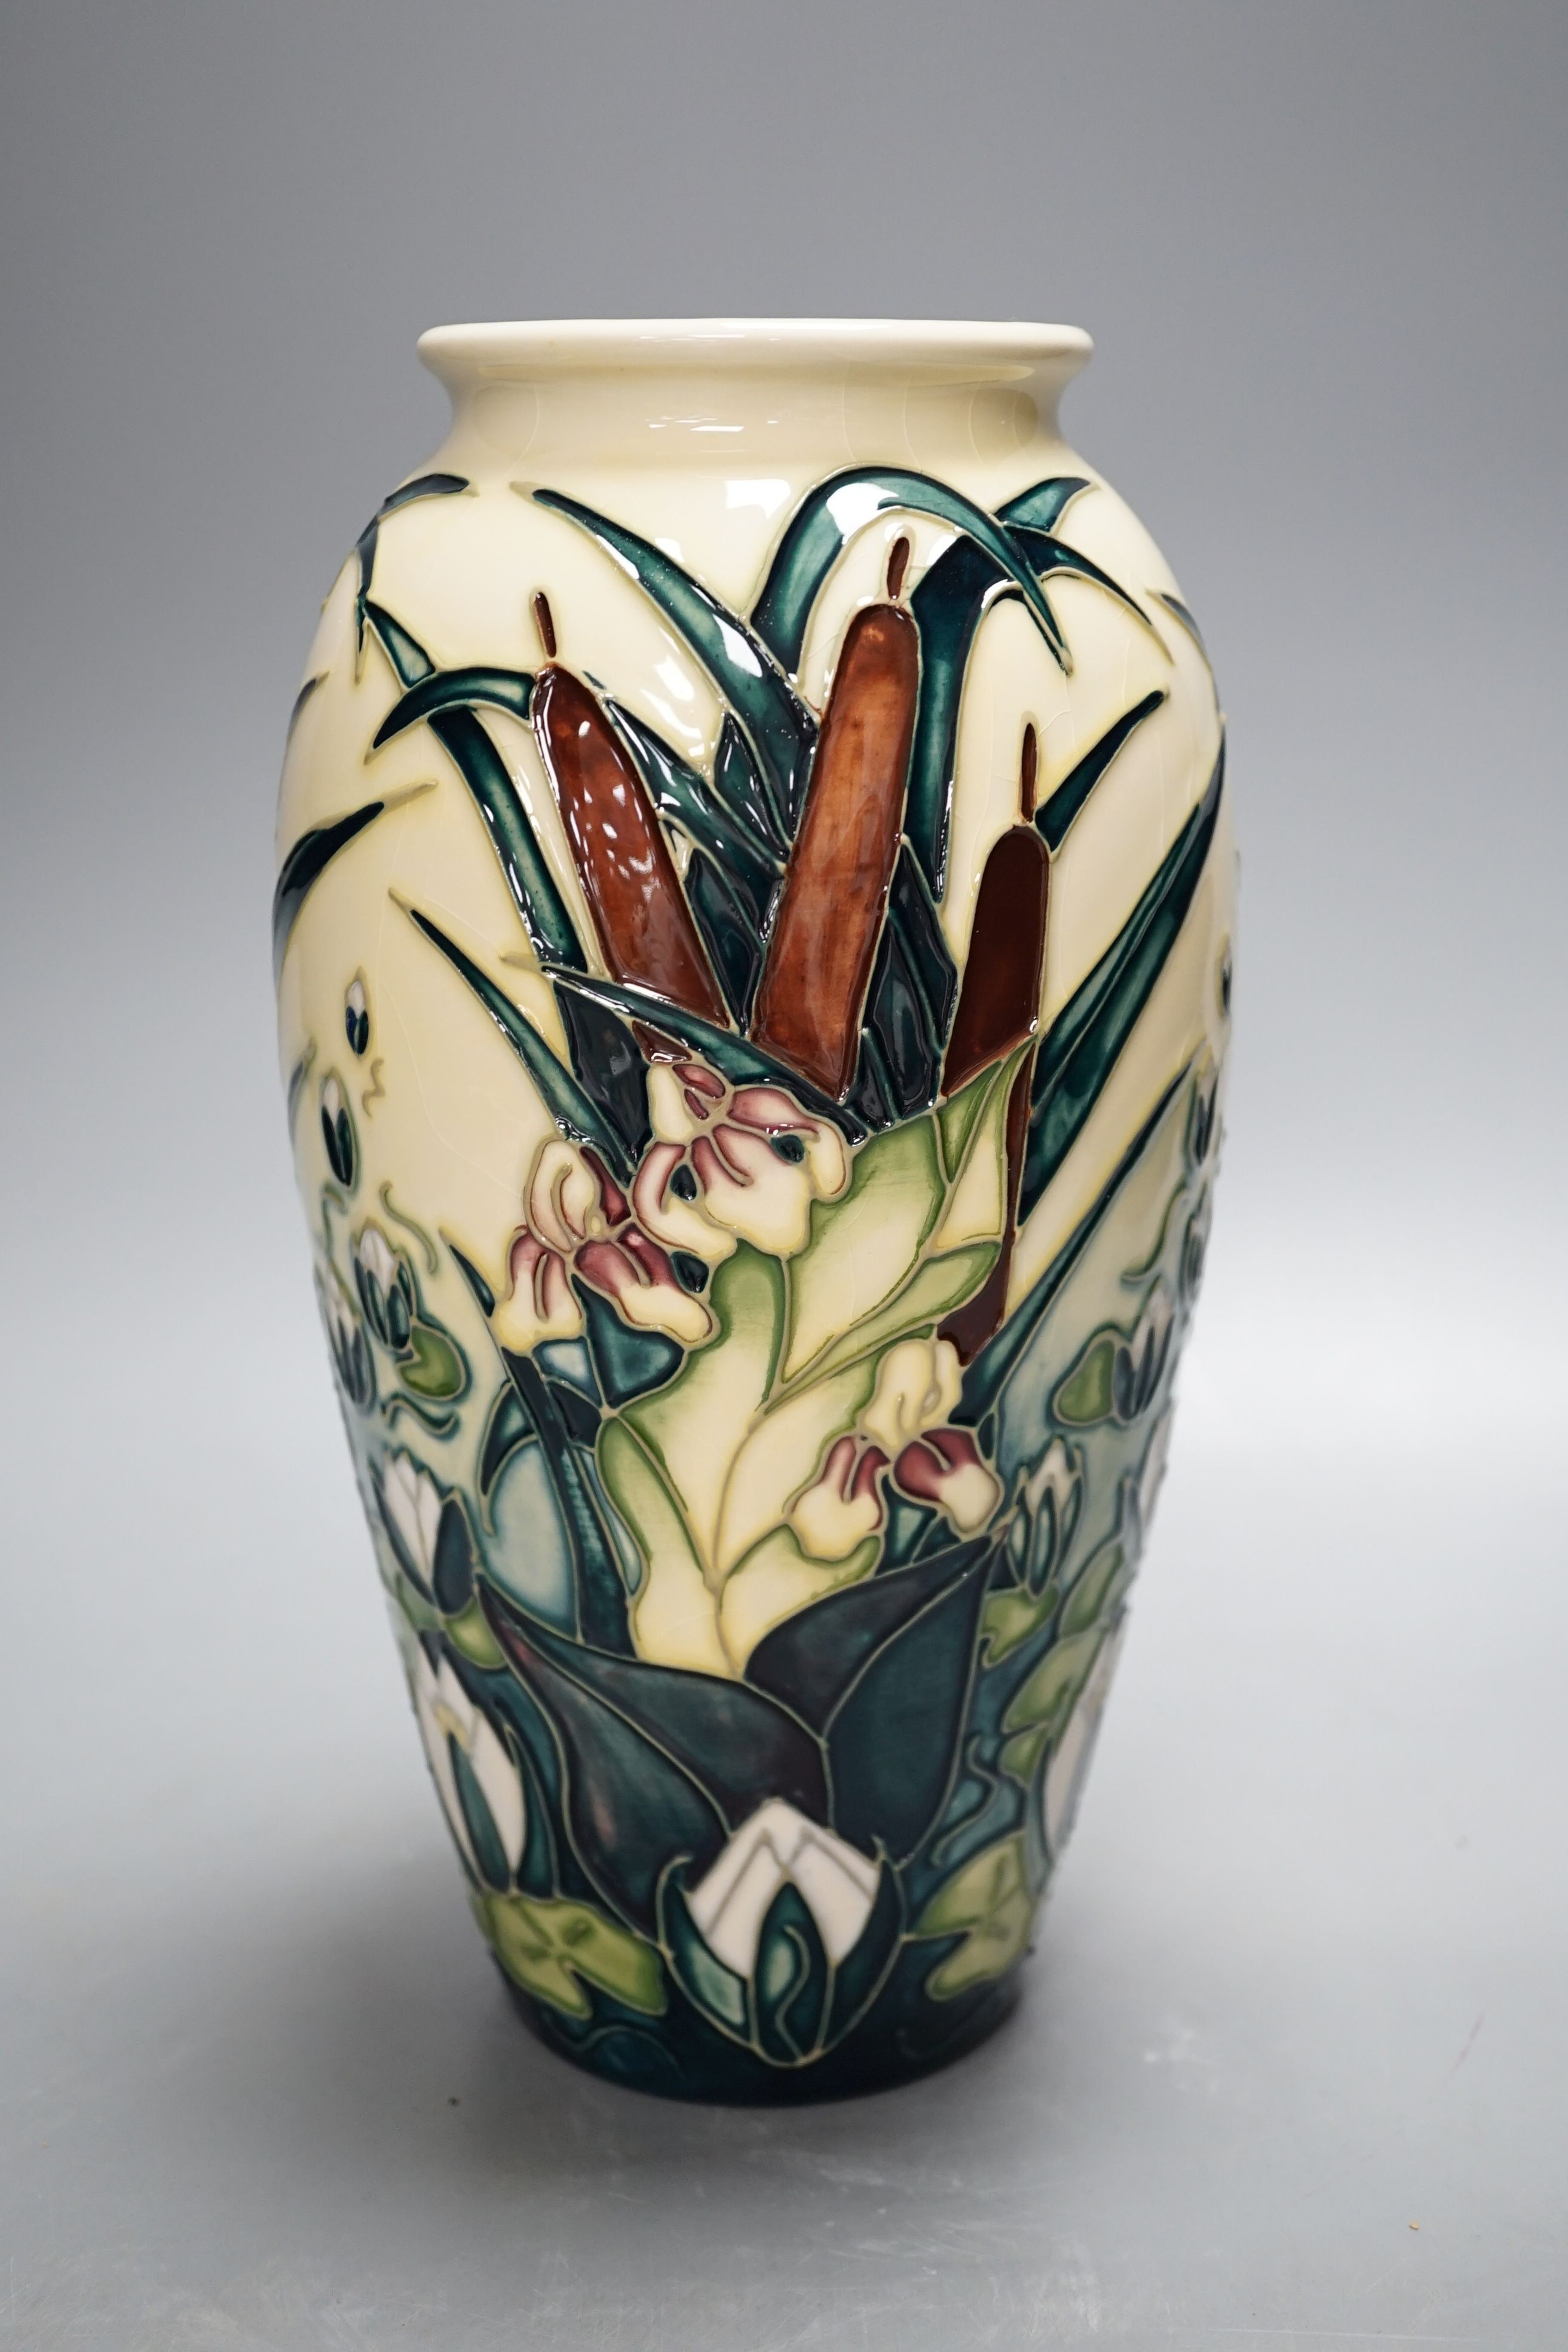 A Moorcroft Lamia pattern ovoid vase, dated 1995, signed Beverley Wilkes, 1998, 26cm., in original box